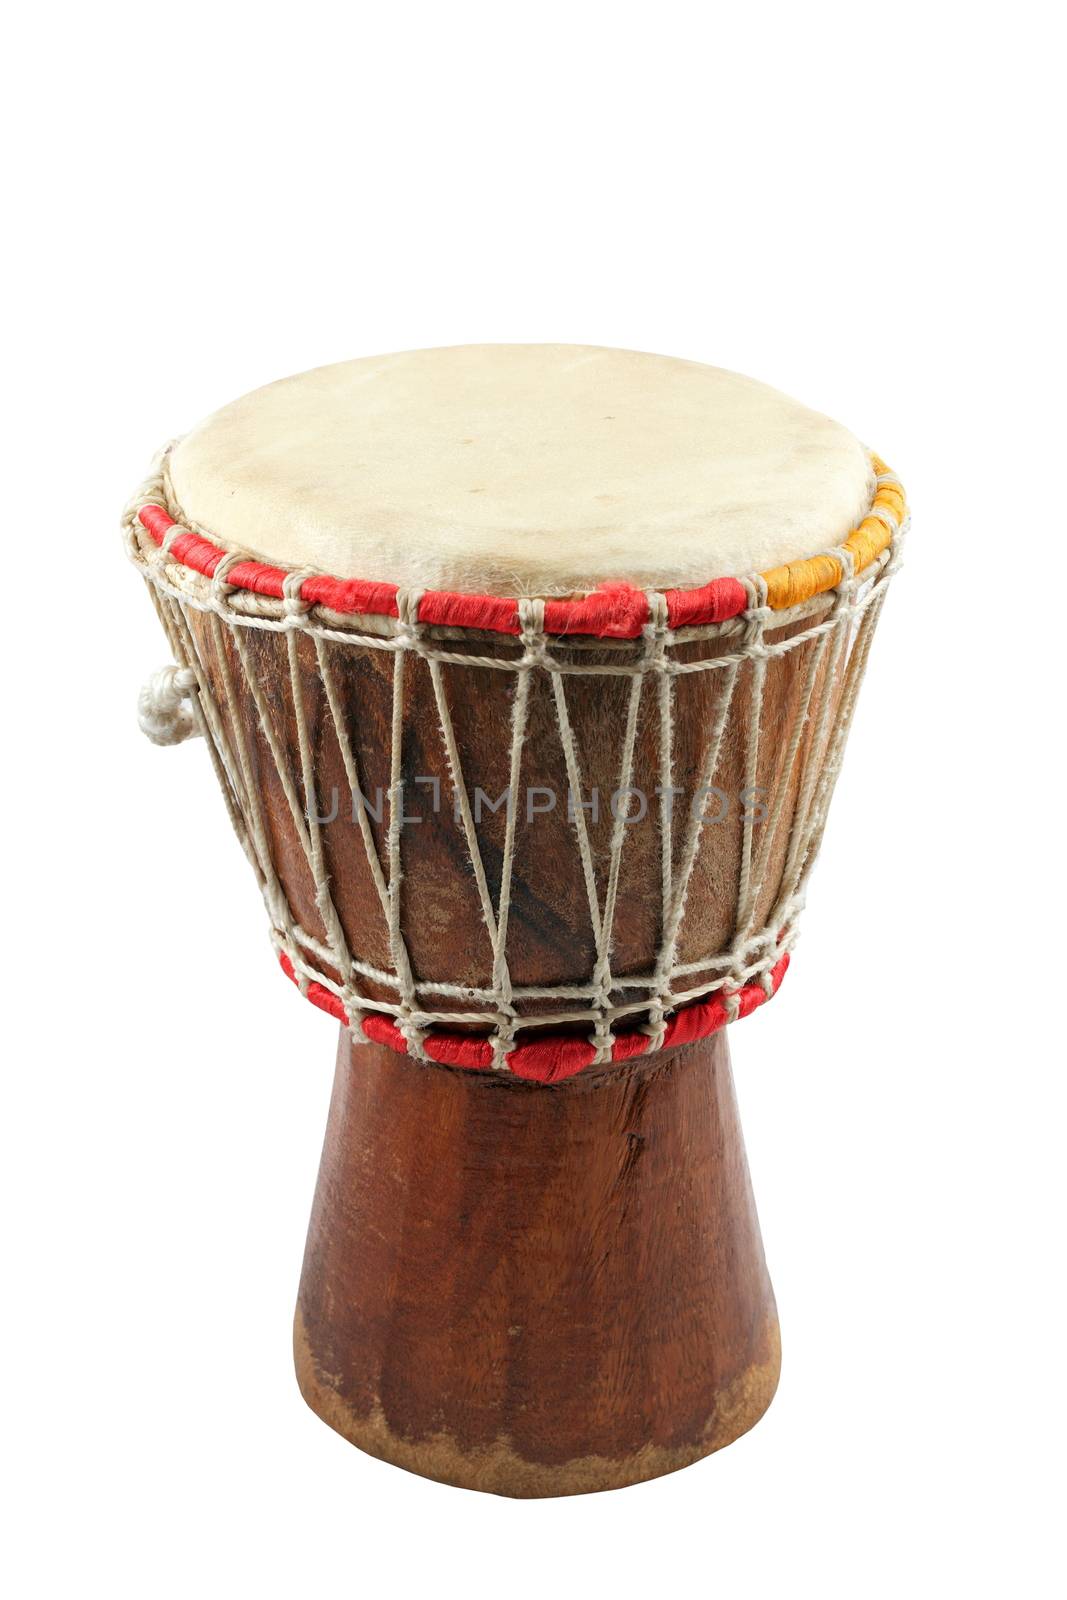 african djembe on white background by taviphoto